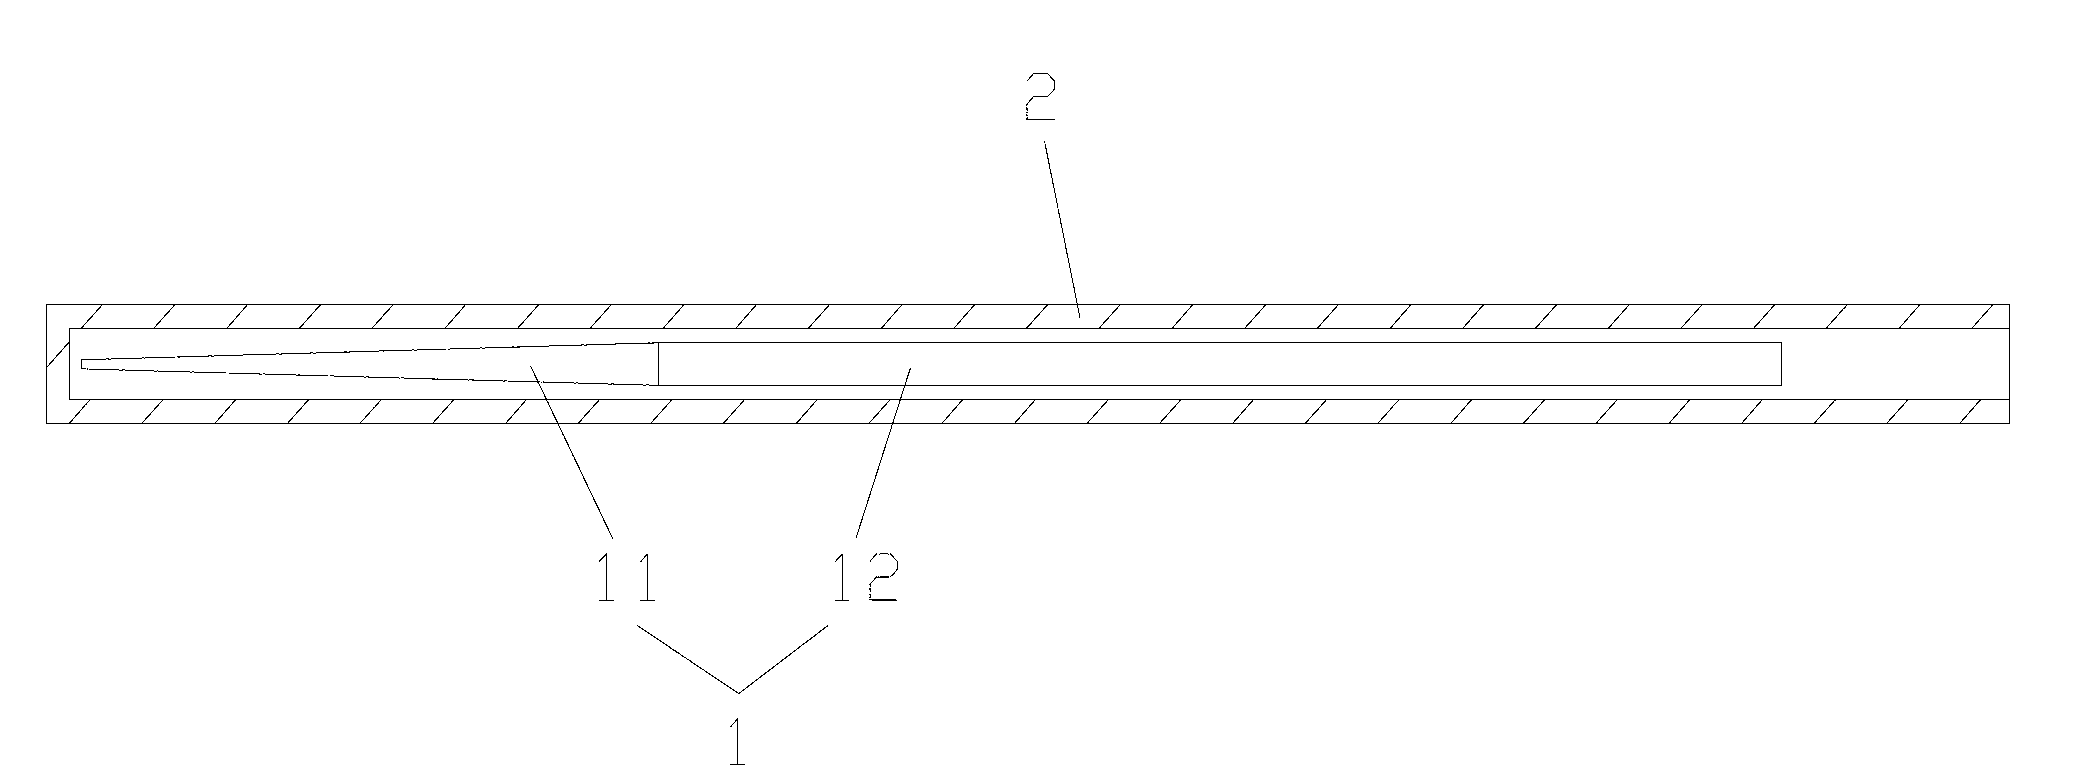 Trace seminal fluid collecting, storing and freezing device